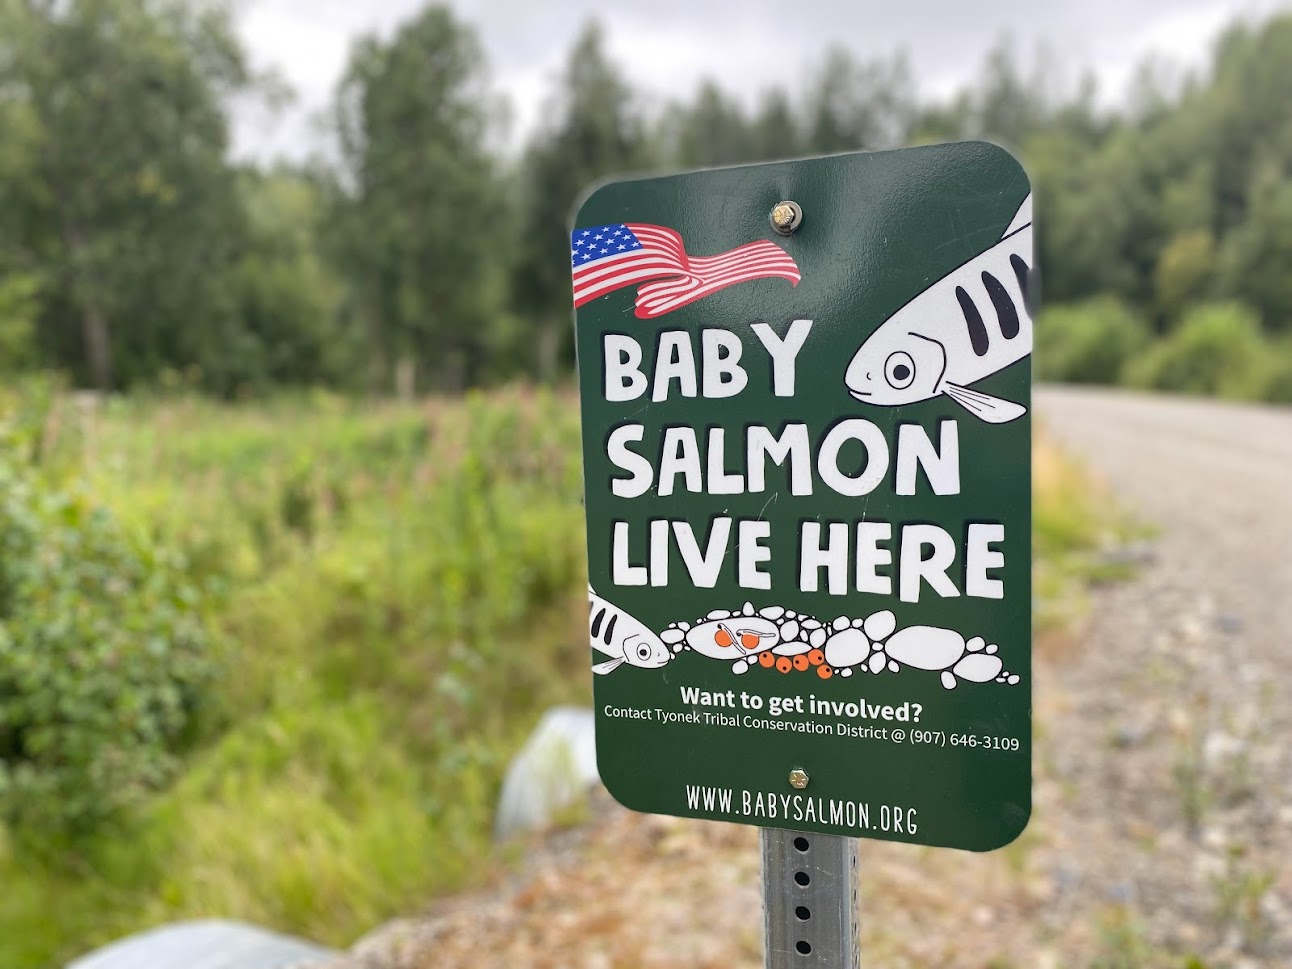 Sign with "Baby Salmon Living Here" written on it